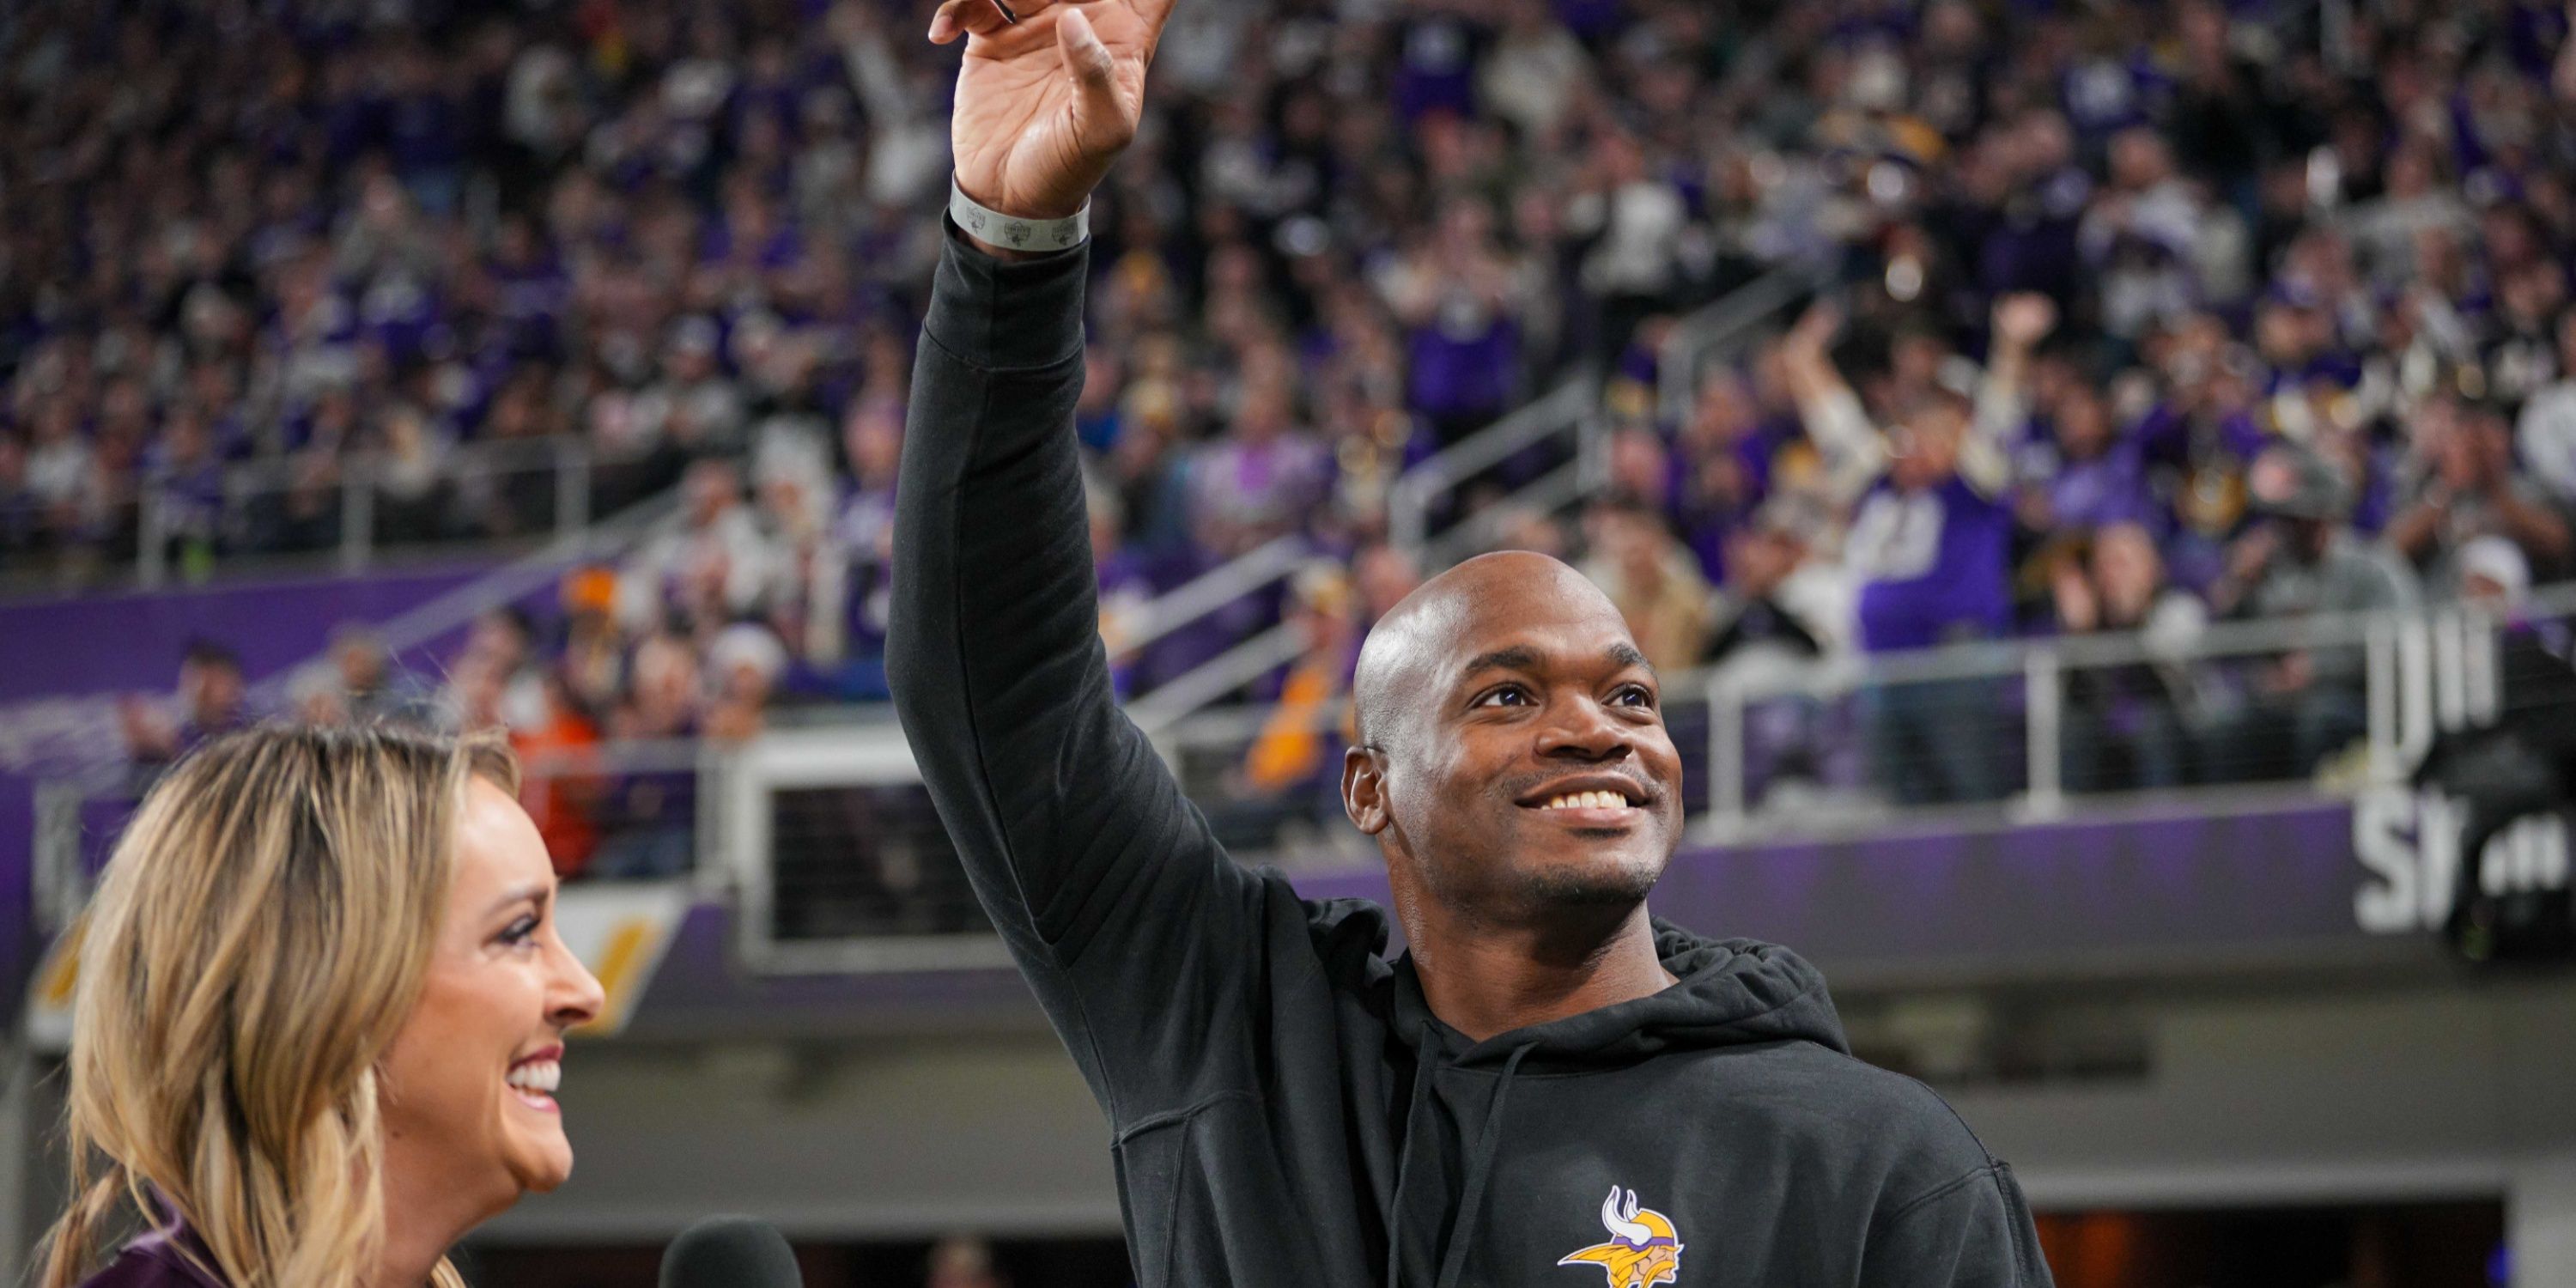 Adrian Peterson, all-time great running back